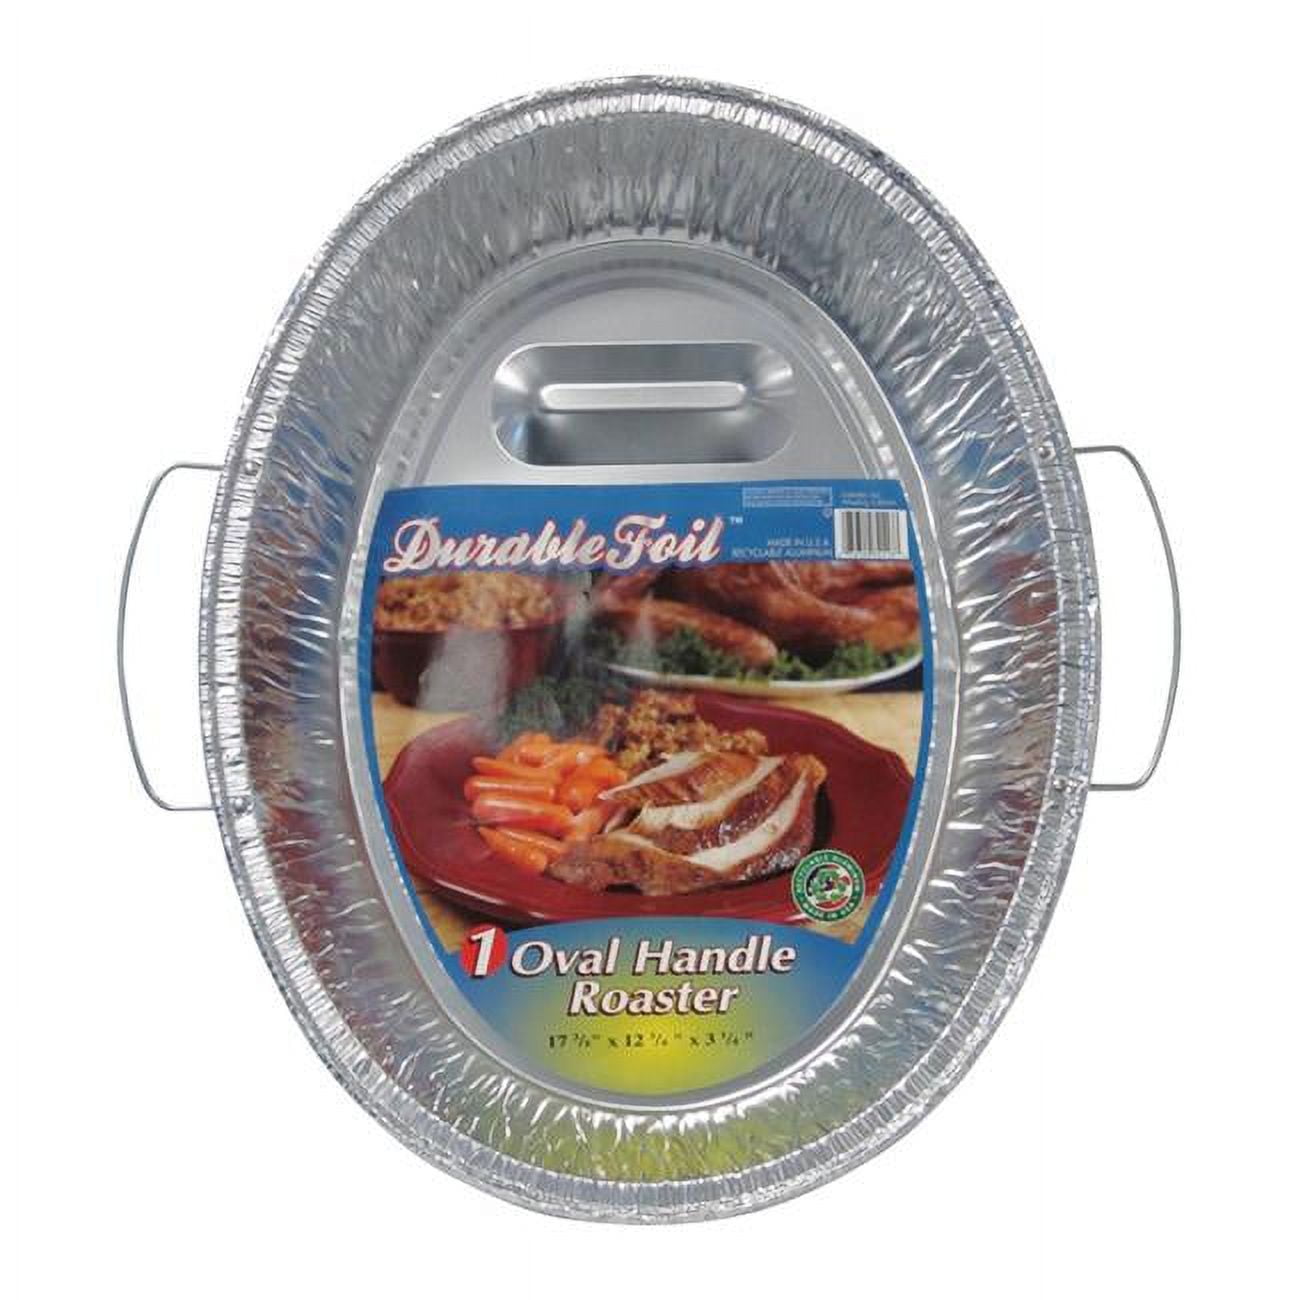 6392112 12.75 X 17.37 In. Durable Foil Oval Roaster Pan - Silver- Pack Of 12